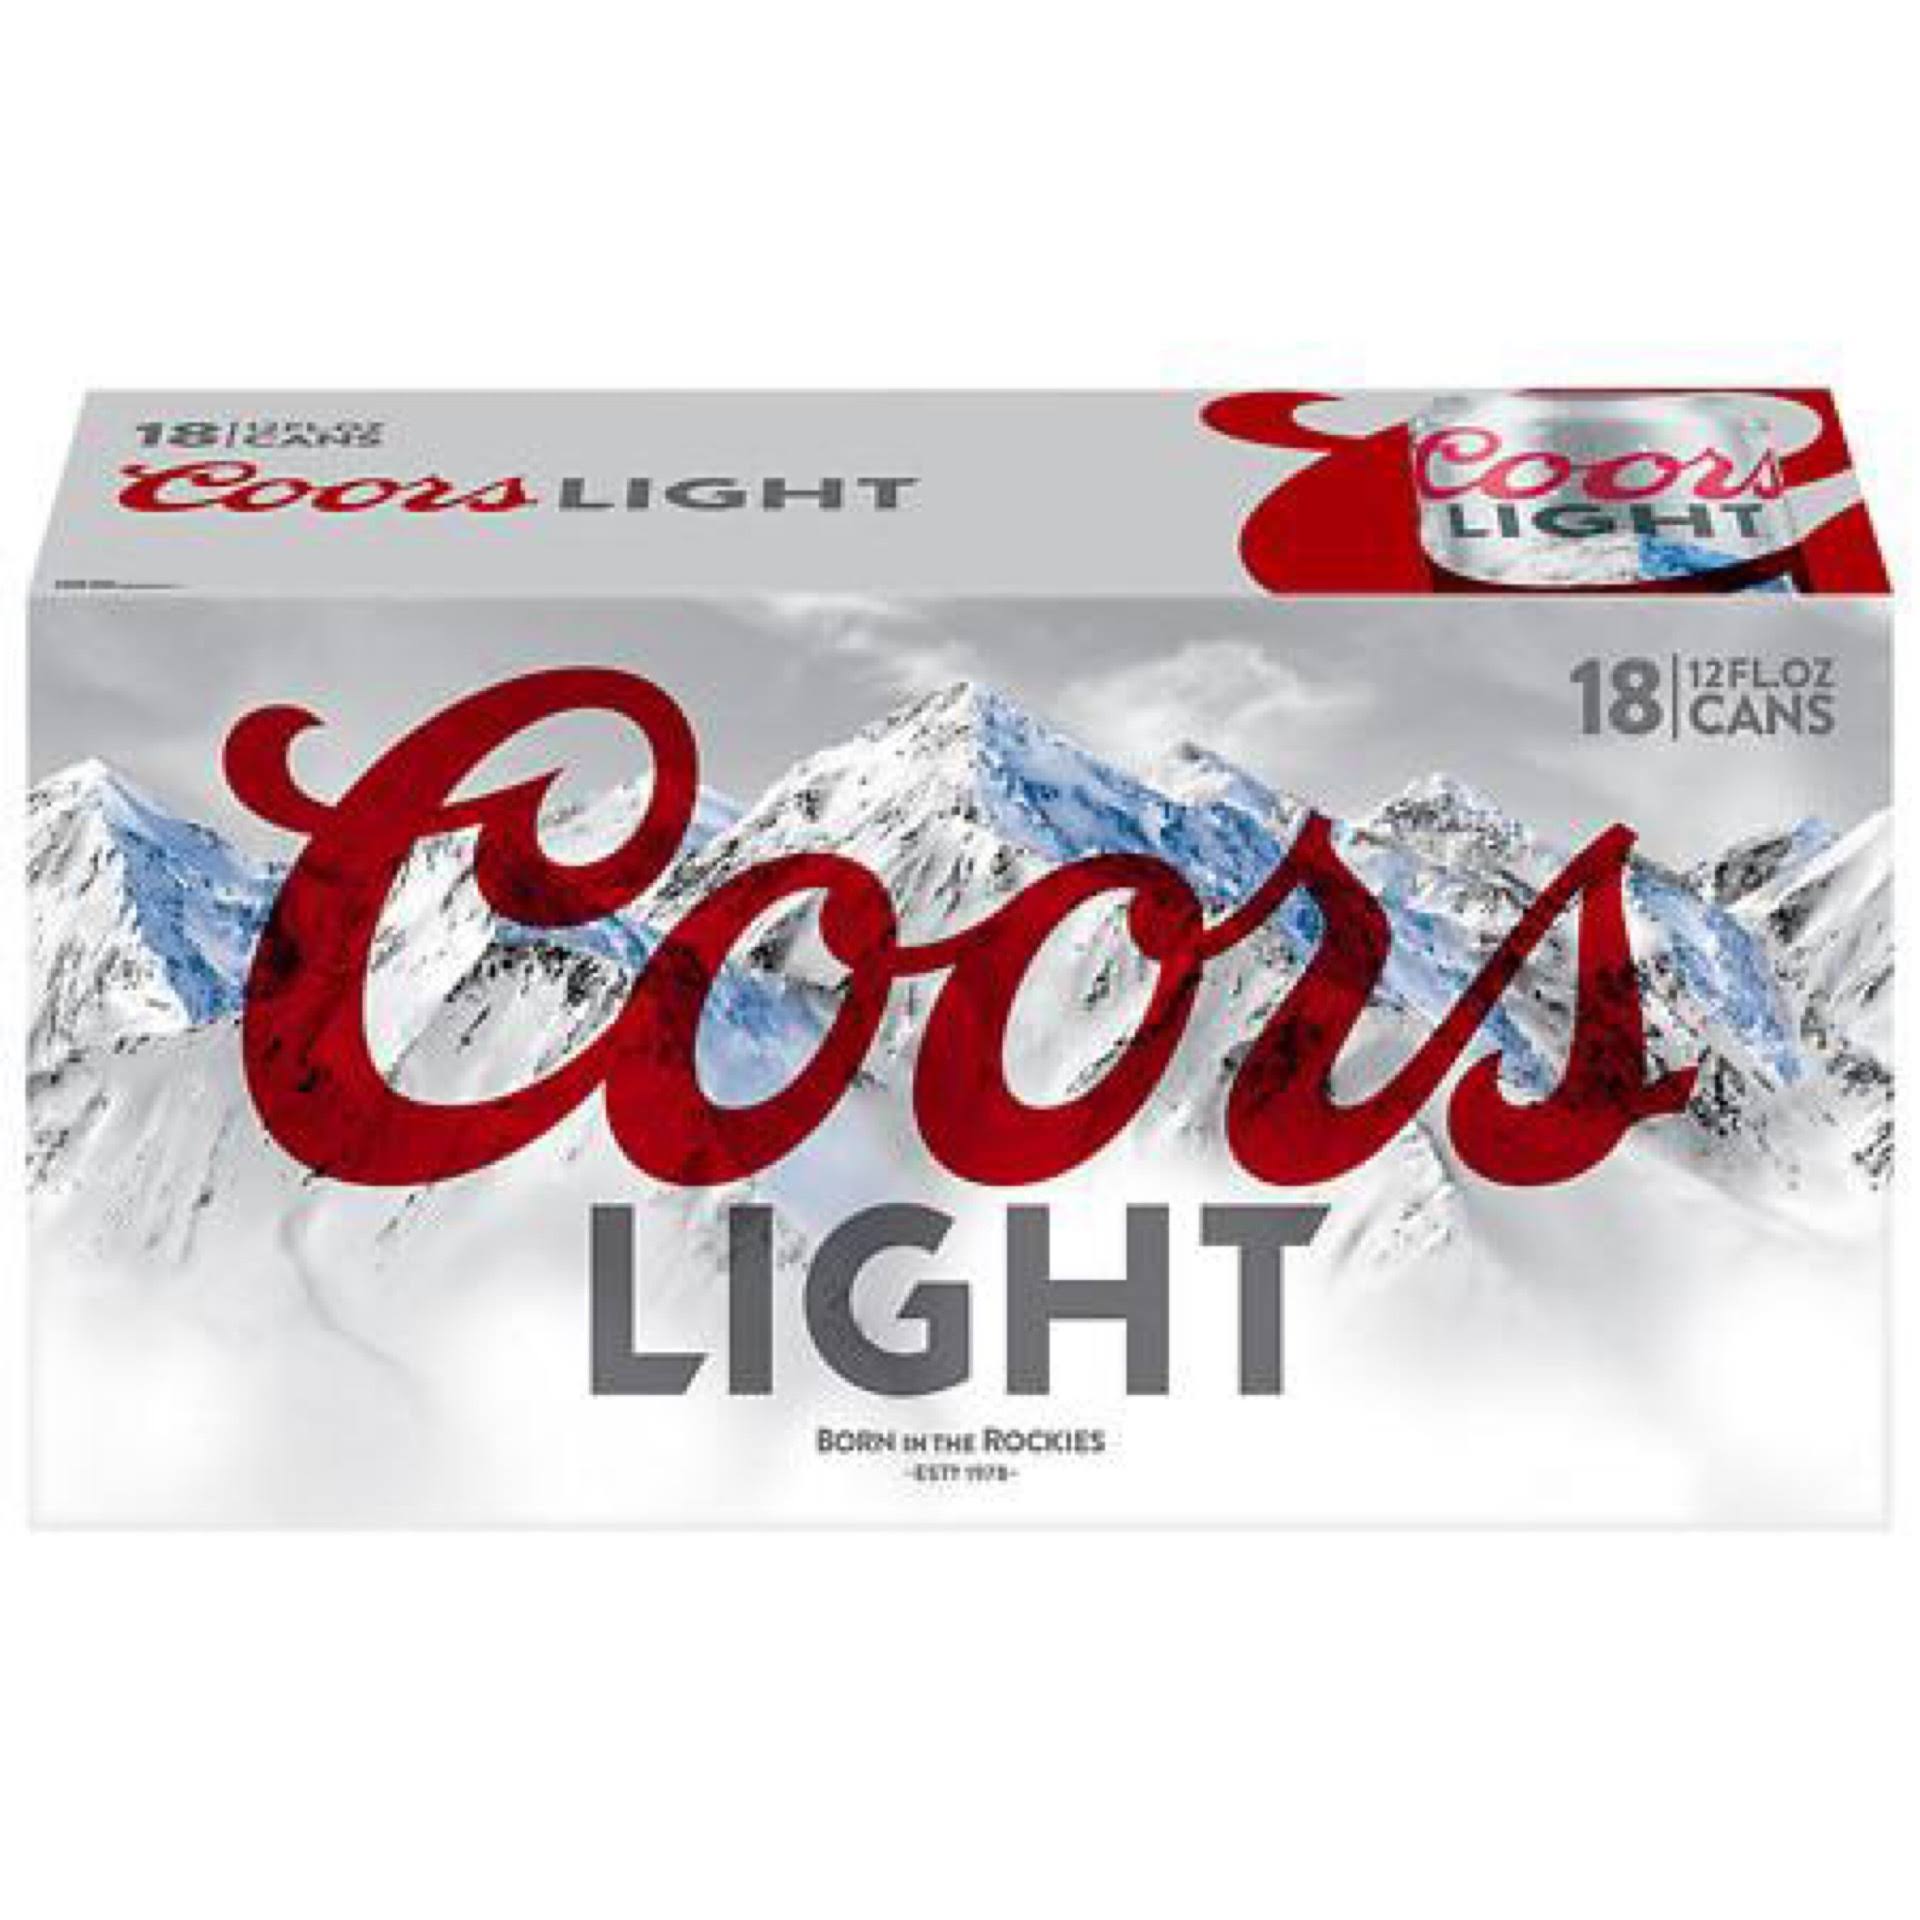 Coors Light Beer - 18 Cans